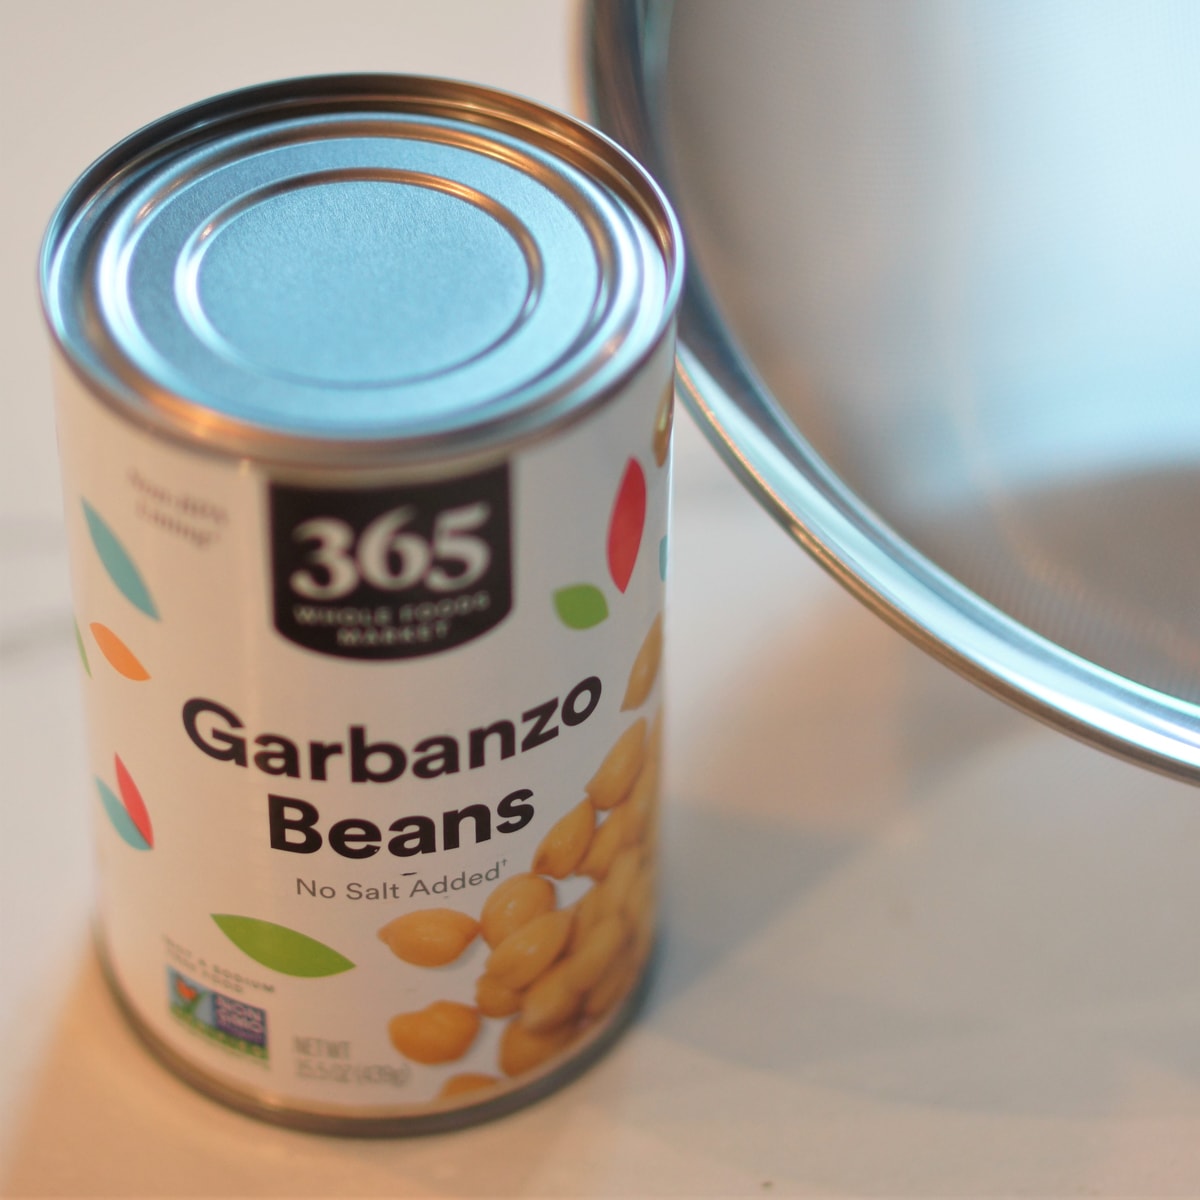 Can of Garbanzo beans.